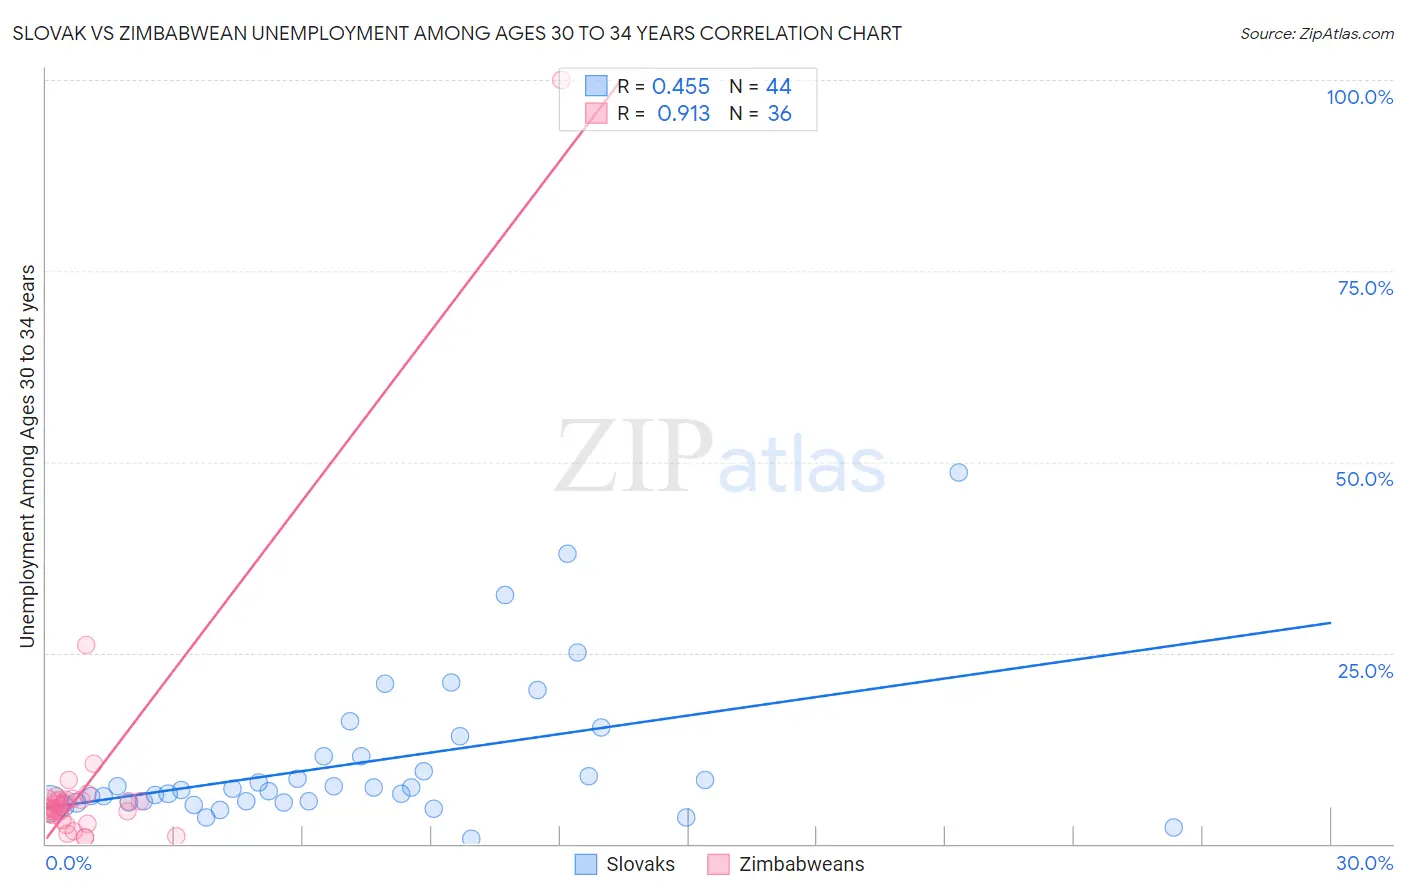 Slovak vs Zimbabwean Unemployment Among Ages 30 to 34 years